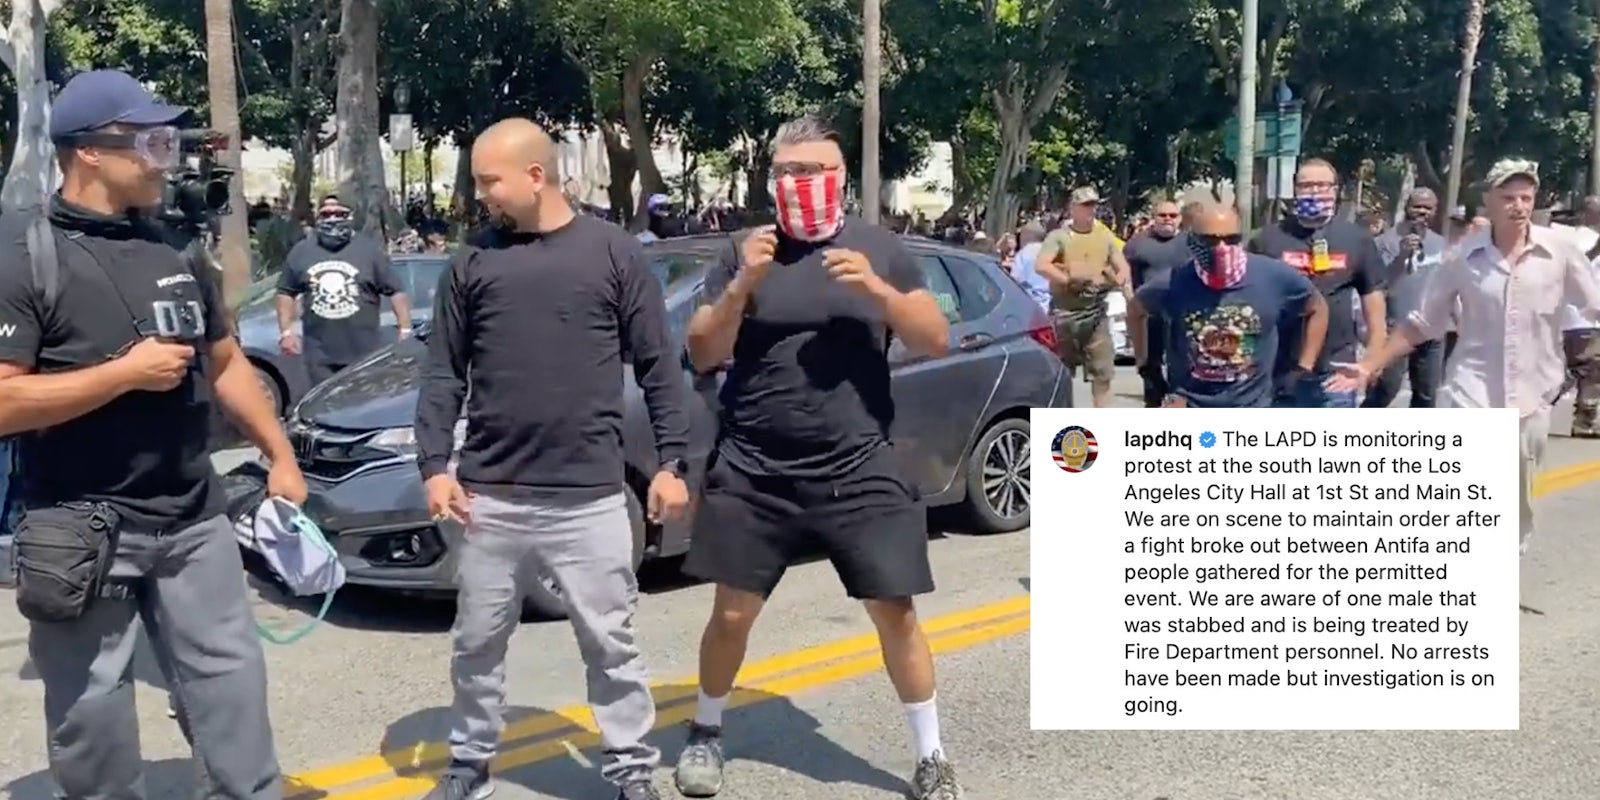 lapd caption blaming saturday's anti-vax protest violence on antifa over a screengrab of alleged proud boys at the protest